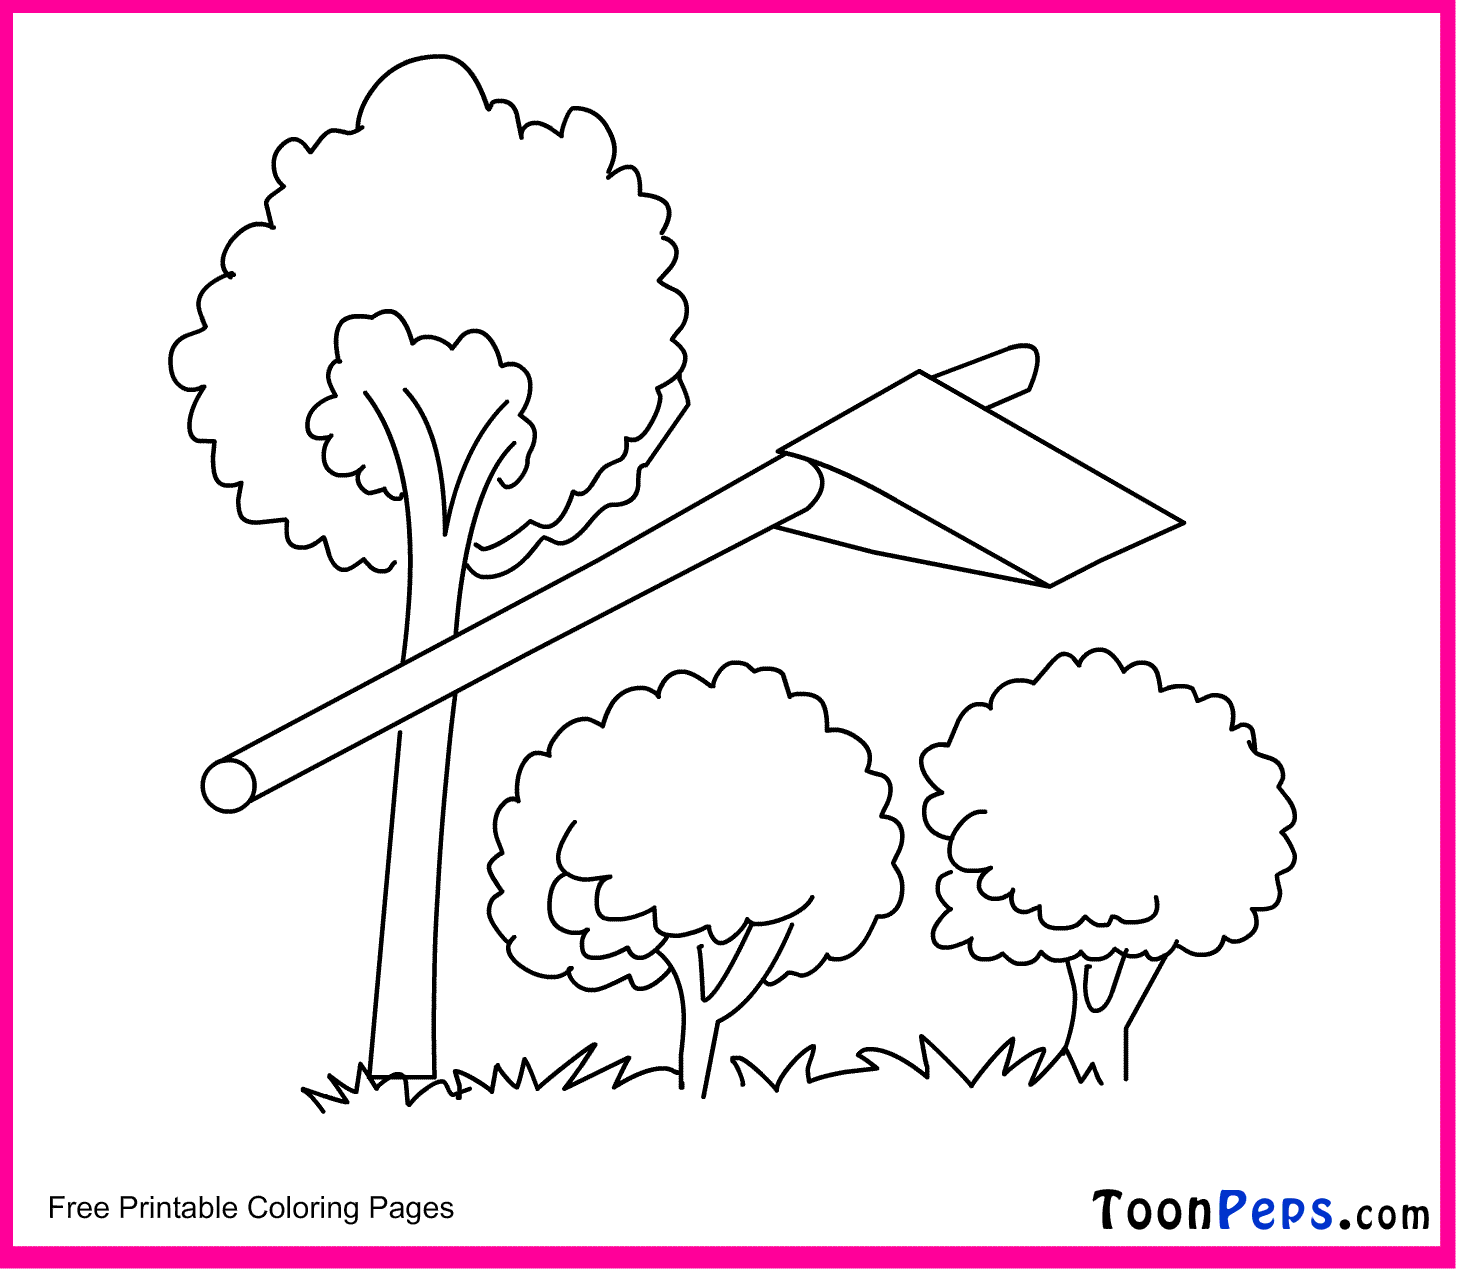 Toonpeps : Free Printable Small Tree coloring pages for kids